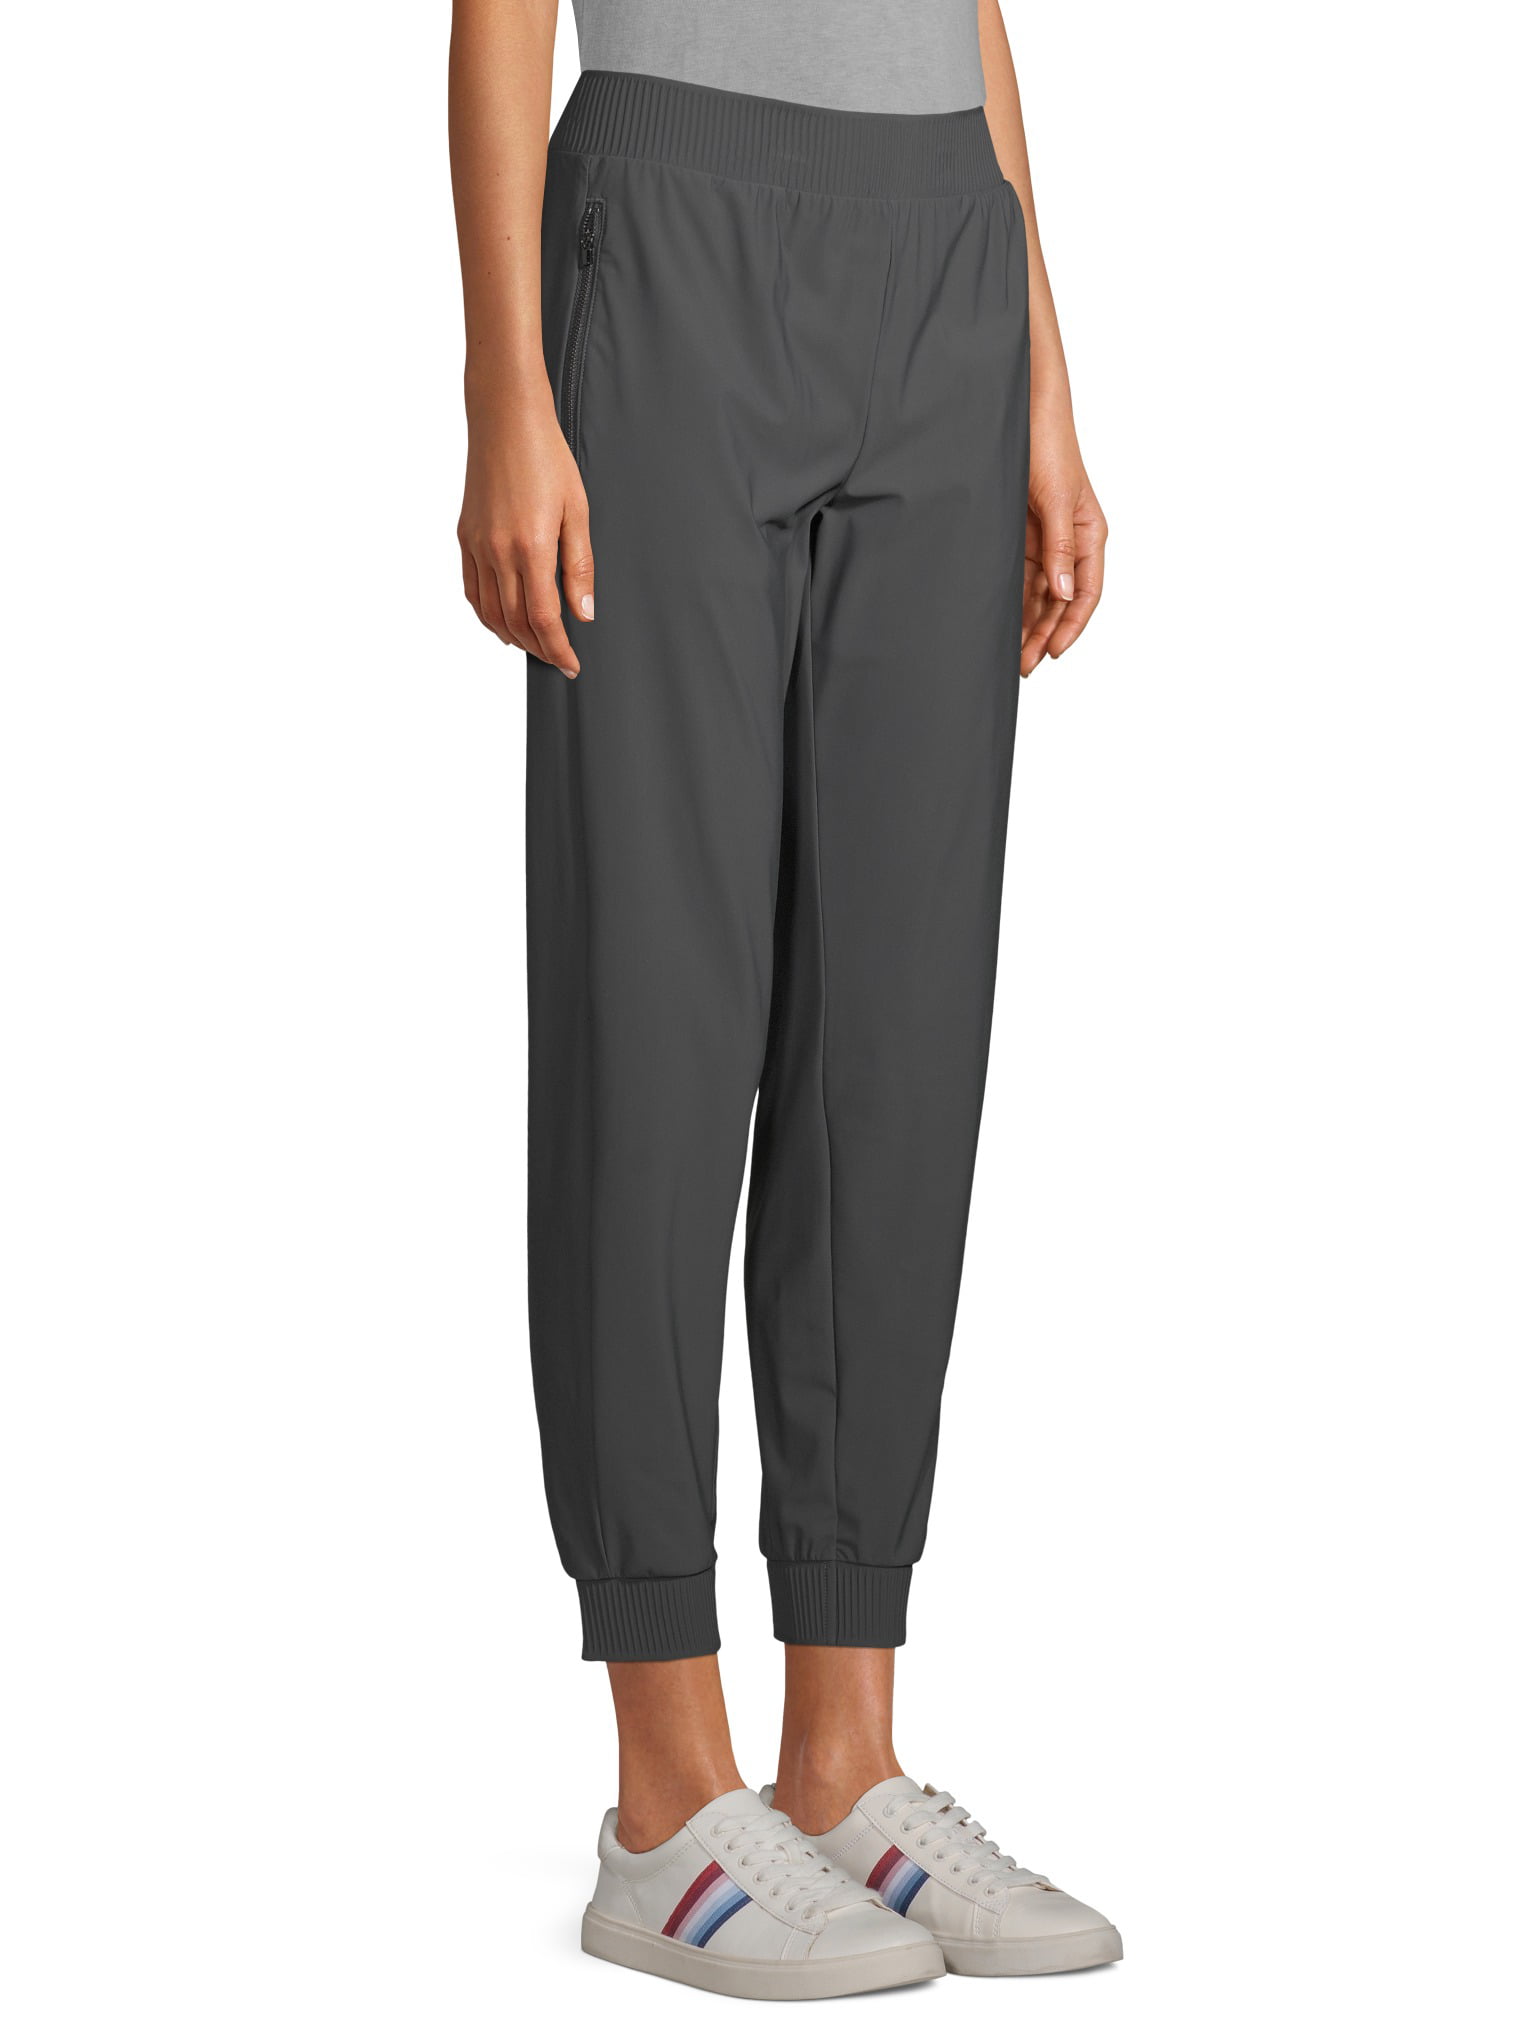 Athletic Works Women's Athleisure Joggers with Pockets 